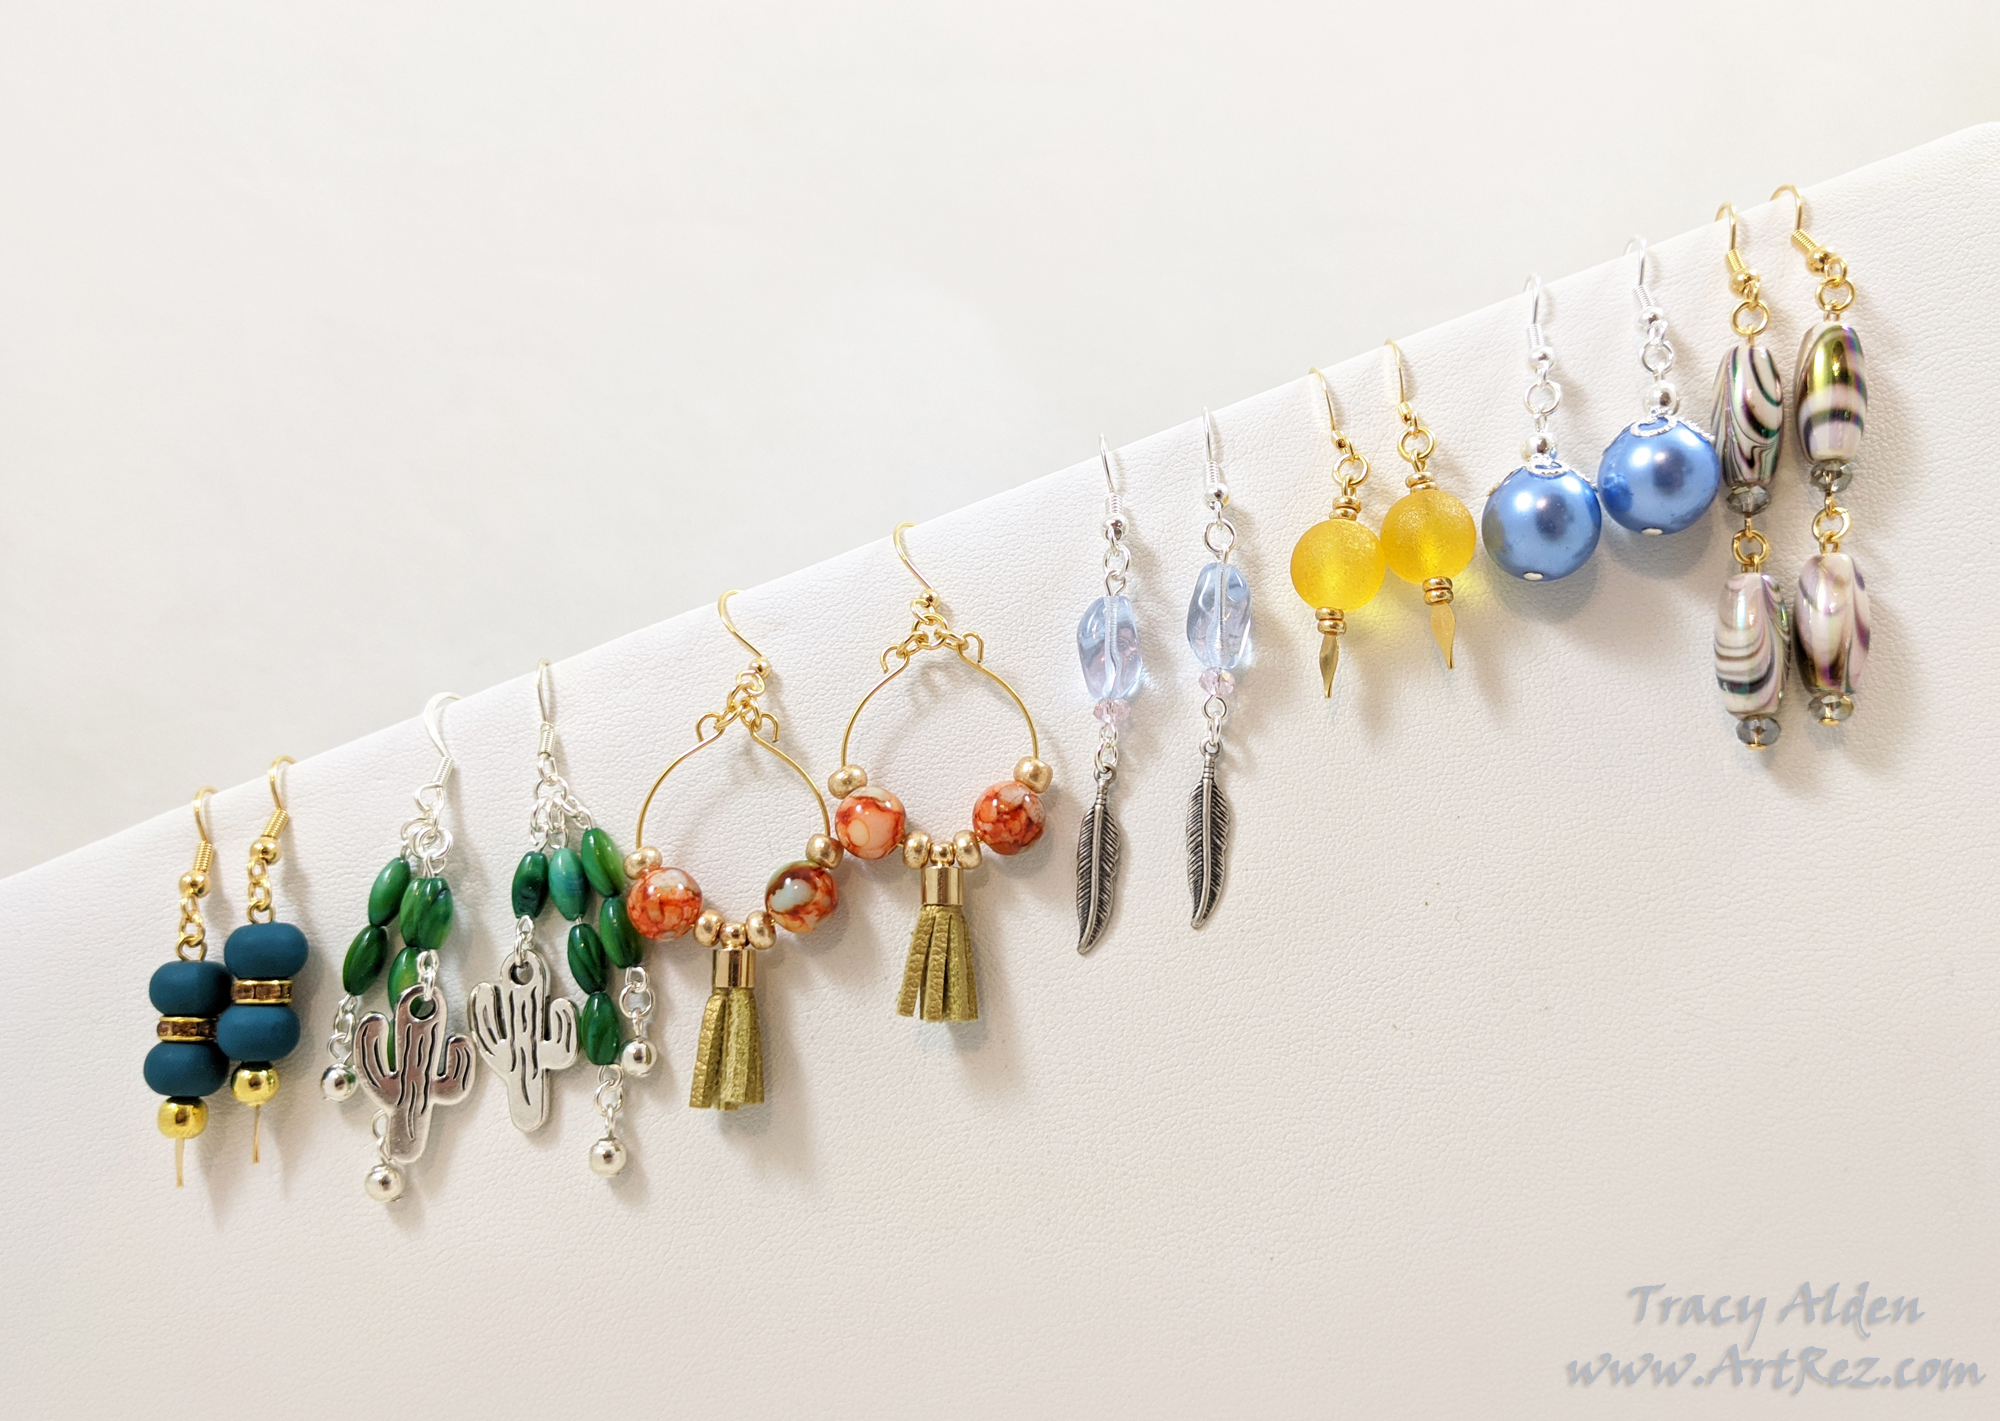 Earring assortment with gold and silver paired with blue, green, yellow and white Jesse James Beads